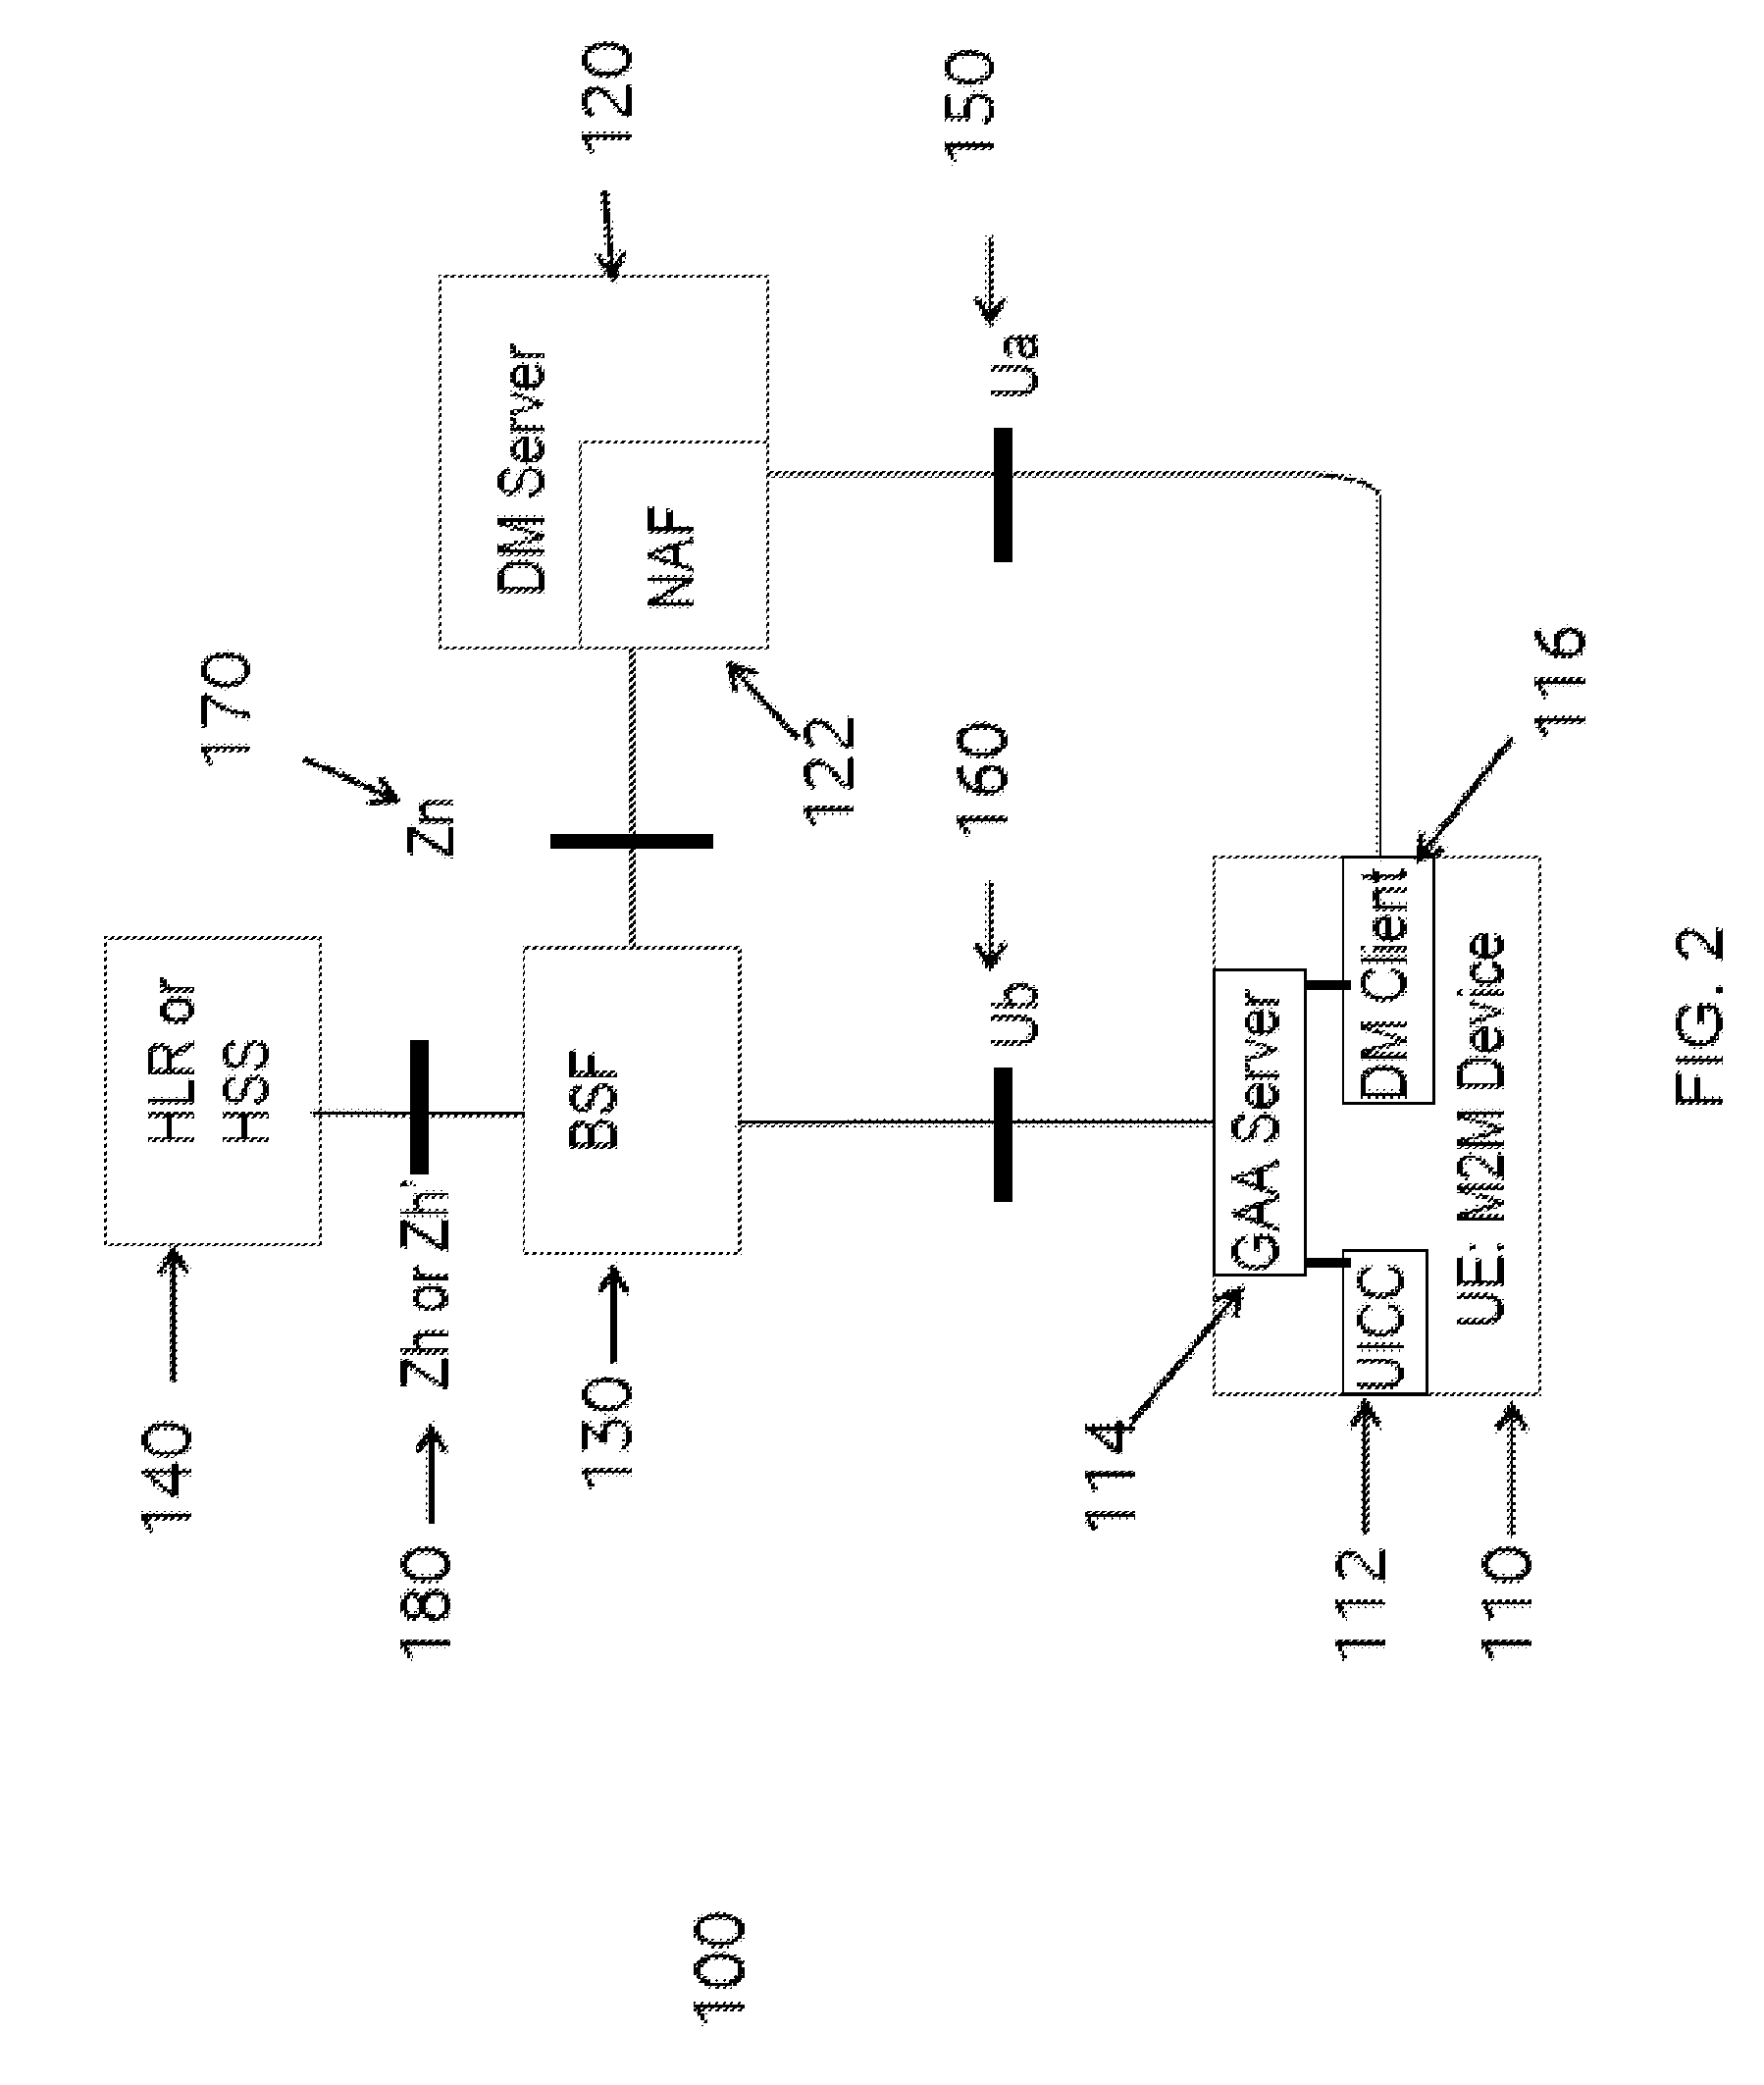 Methods and systems for operating a secure mobile device